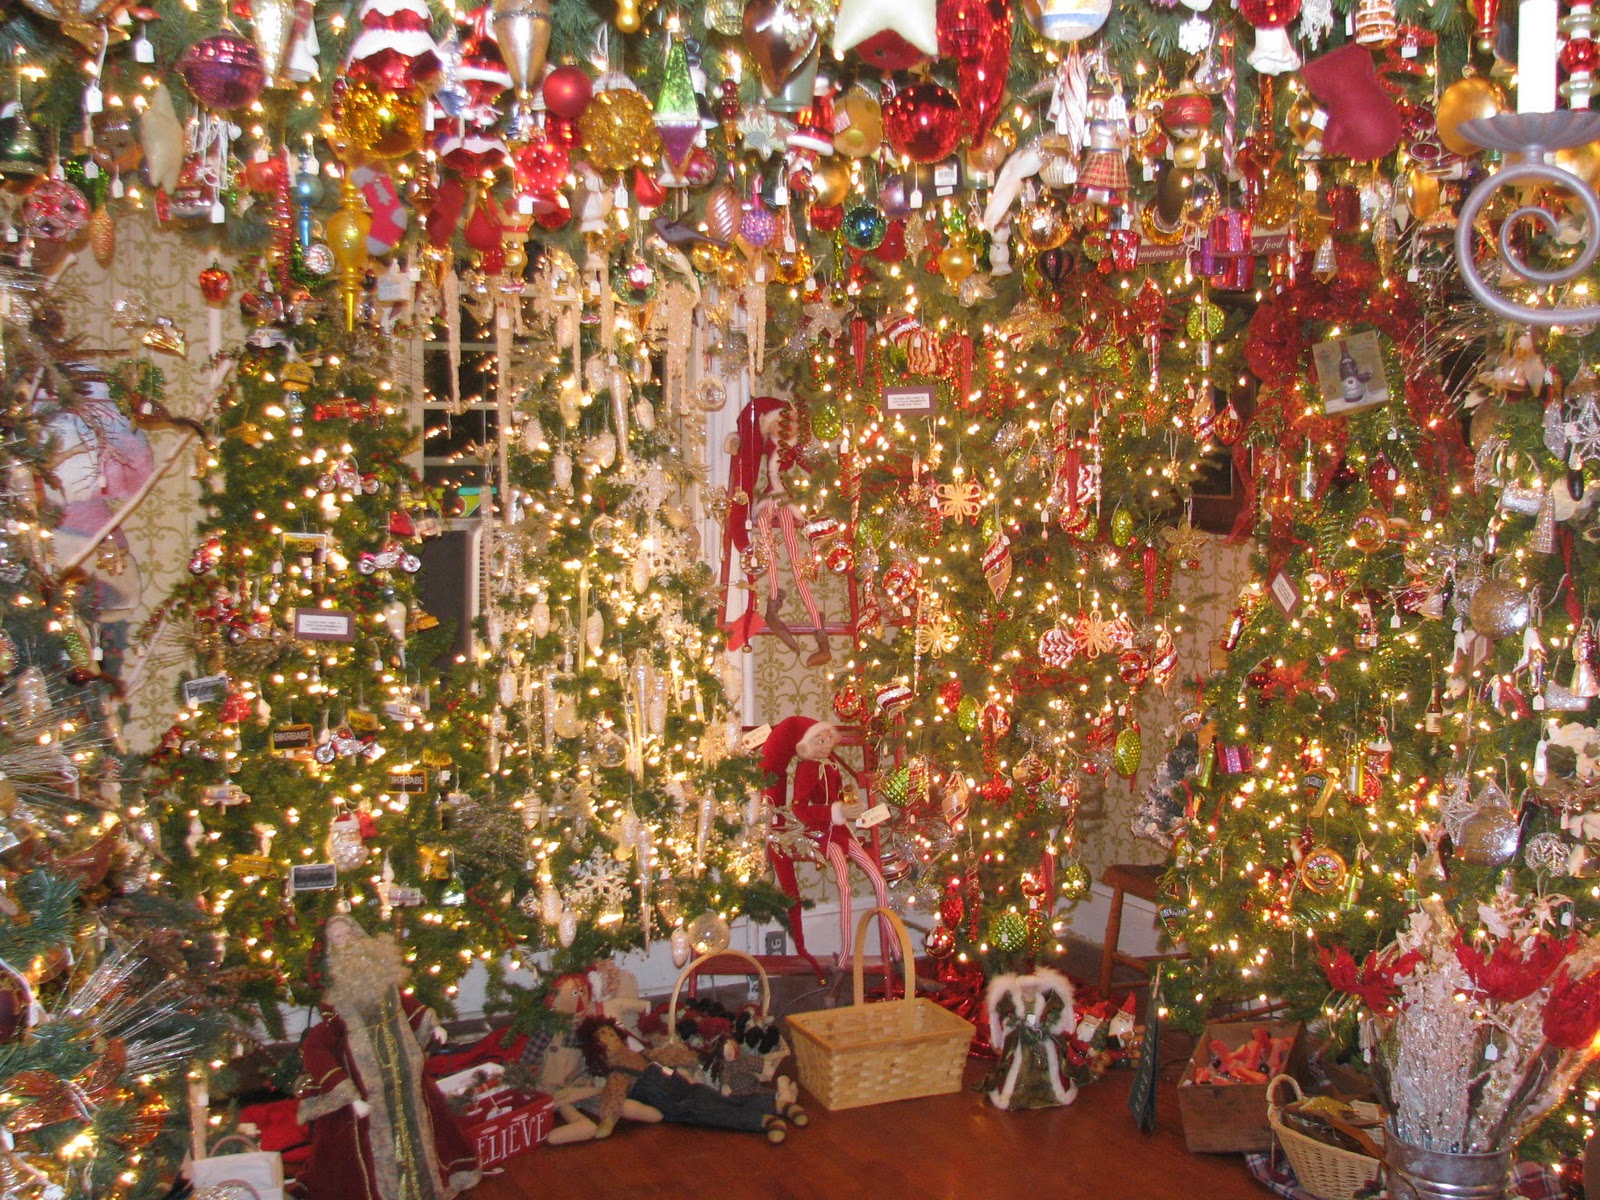 25 Top The Christmas Tree Shop Ideas | PicsHunger